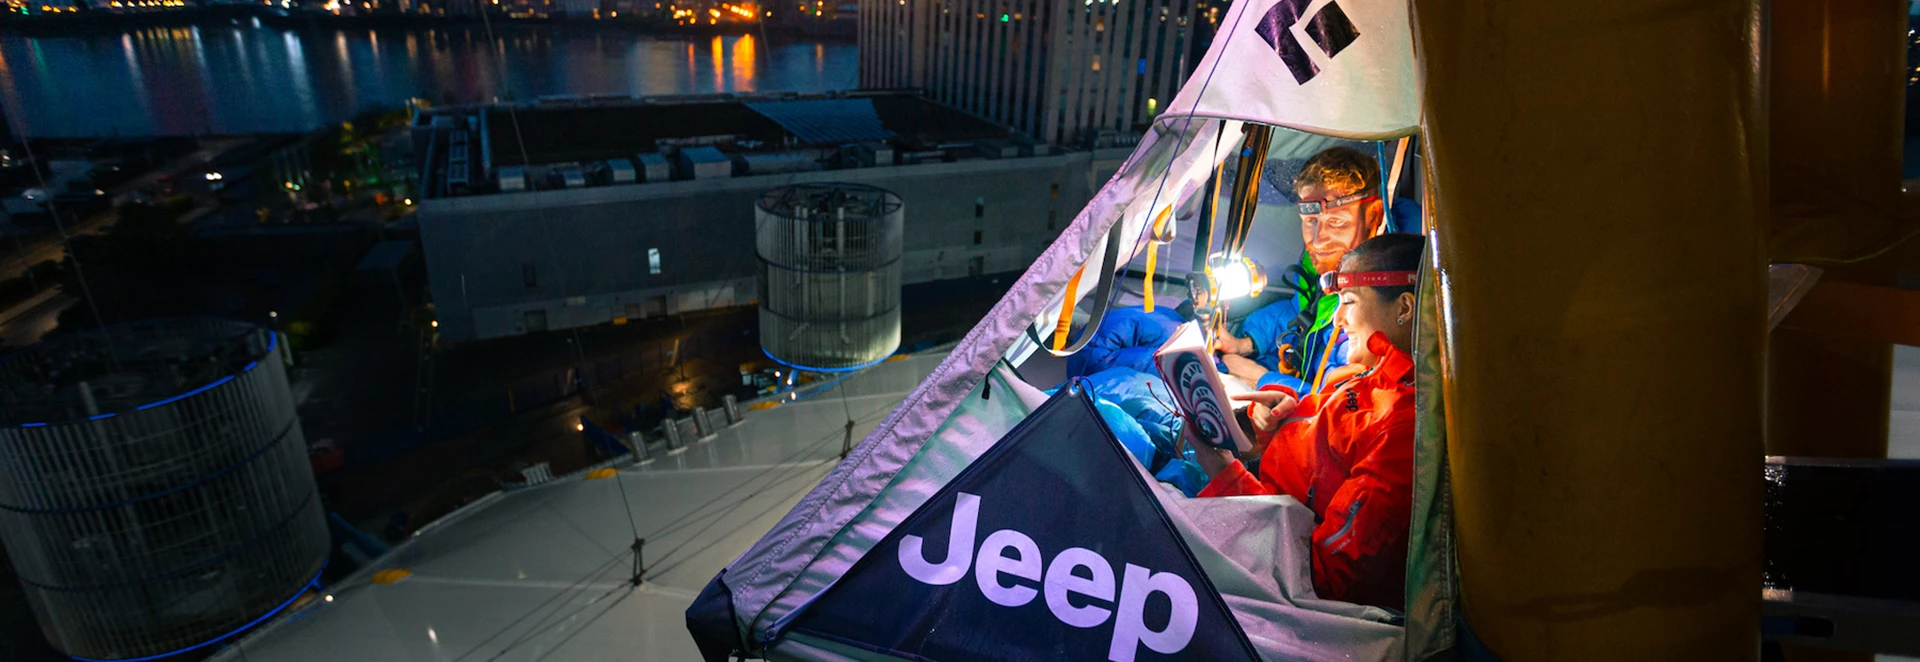 Jeep opens ‘motel’ tent suspended on The O2 arena, powered by new PHEV 